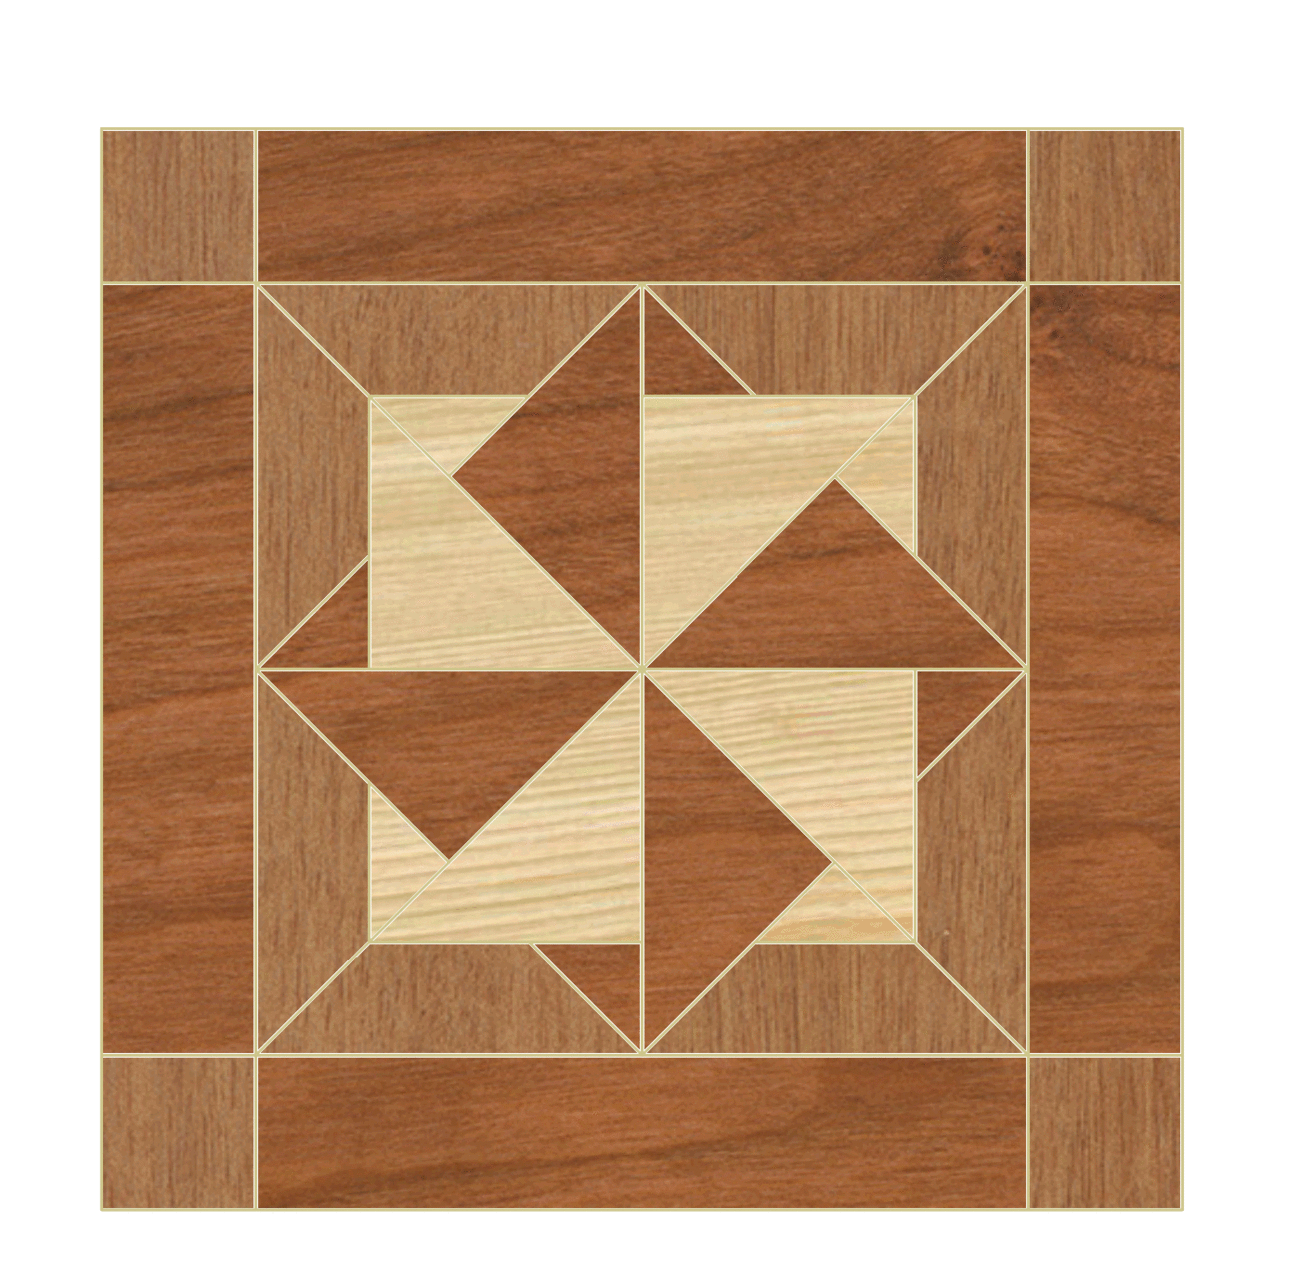 Woodworking quilt projects